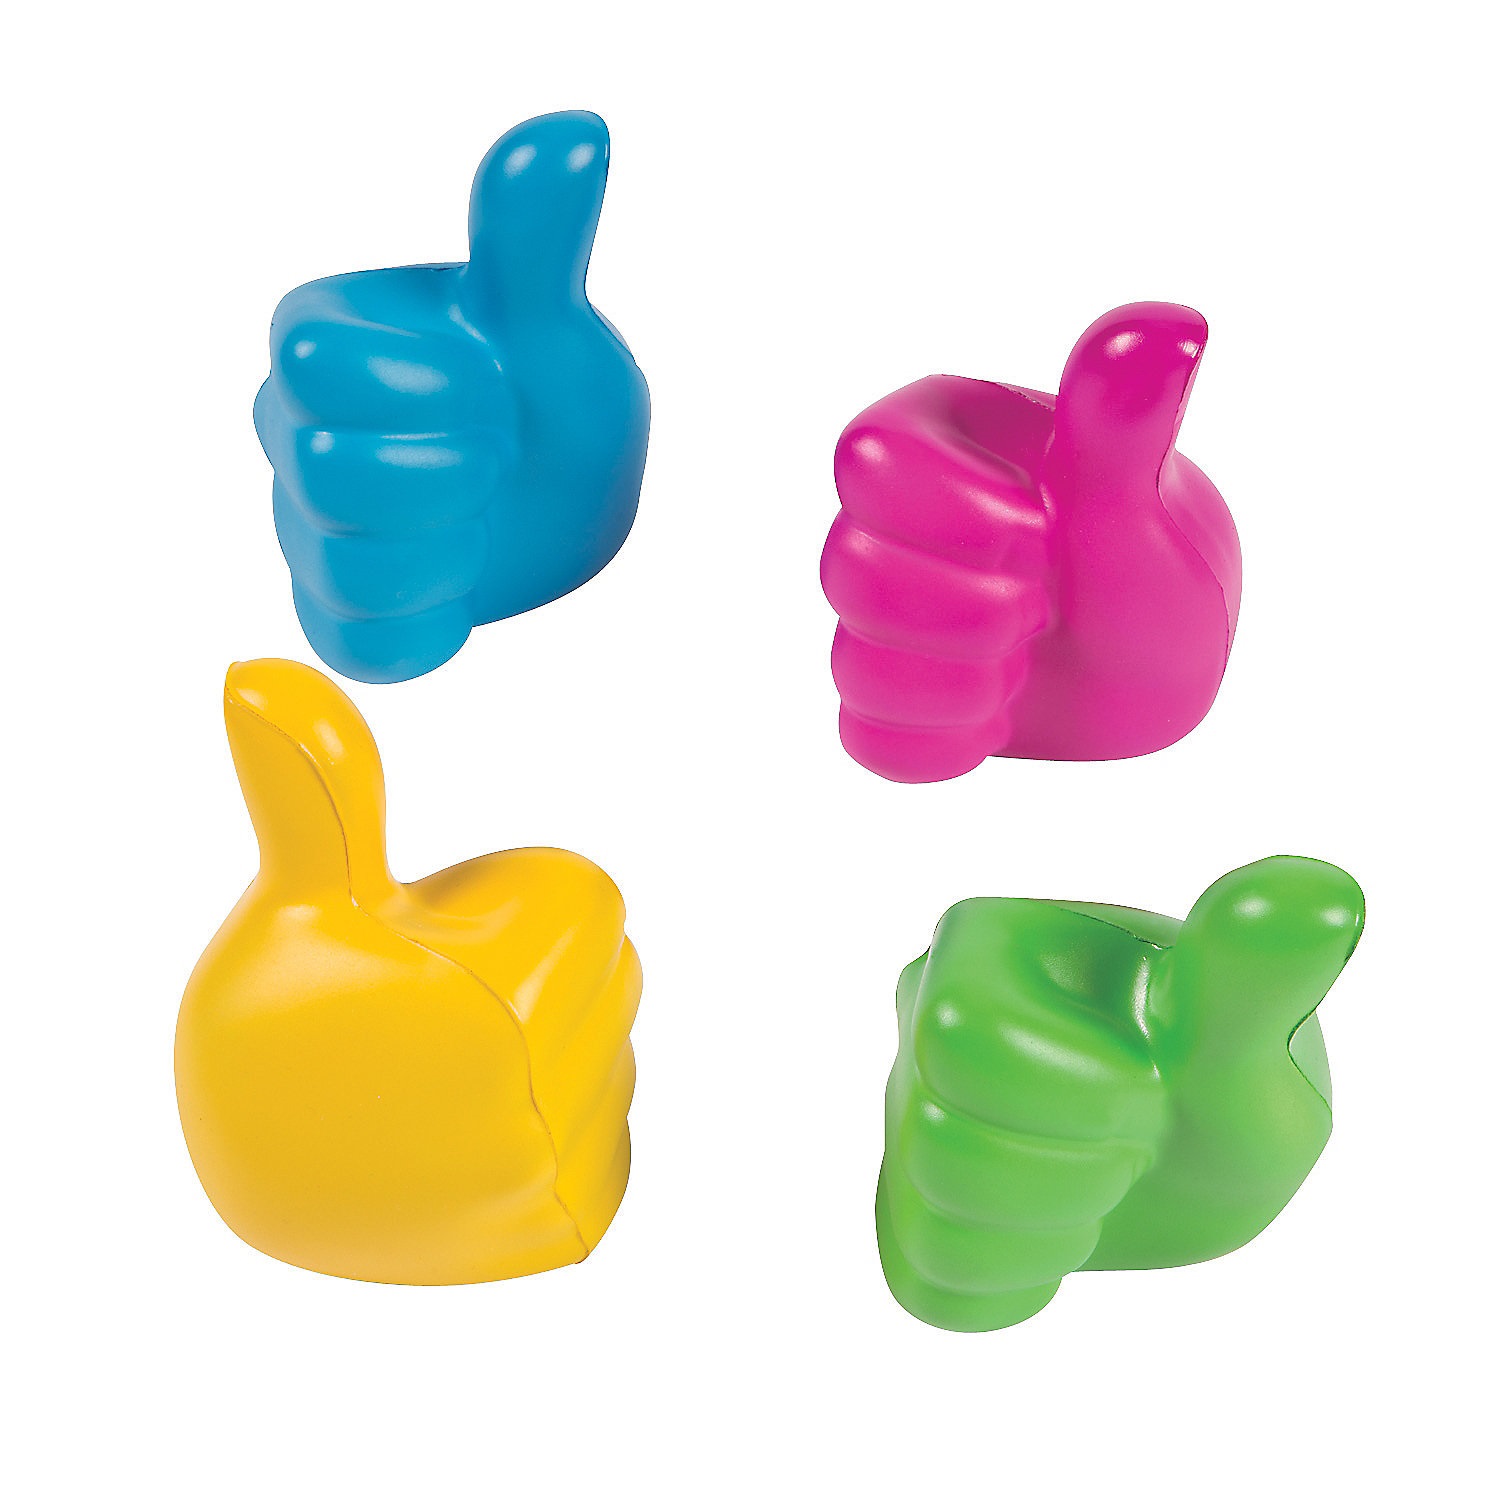 thumbs-up-stress-toys-12-pc-_13663594-a01